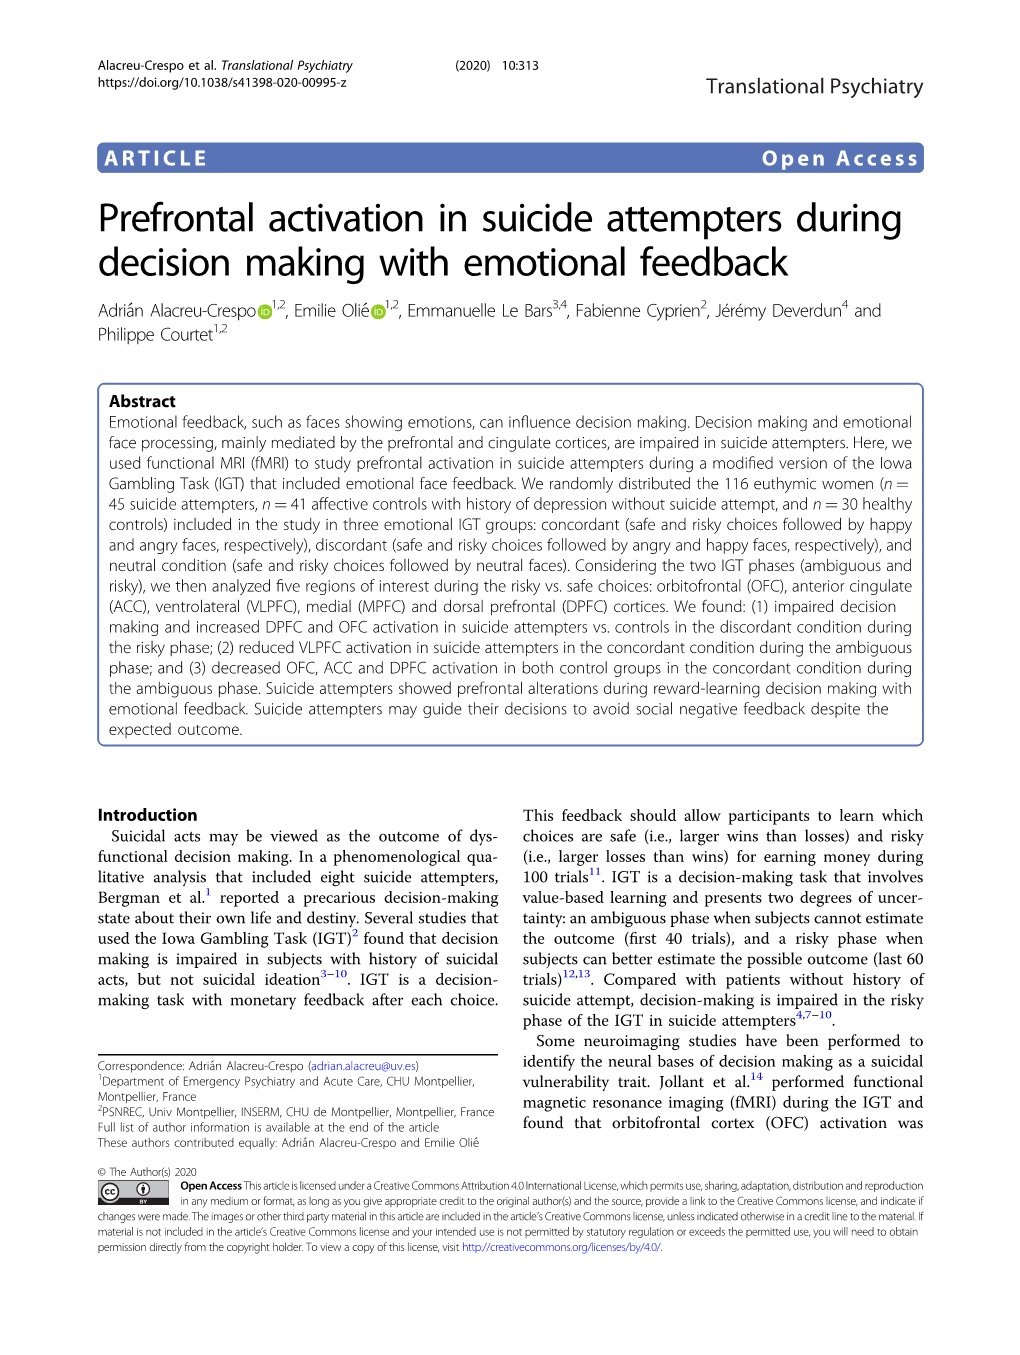 Prefrontal Activation in Suicide Attempters During Decision Making with Emotional Feedback